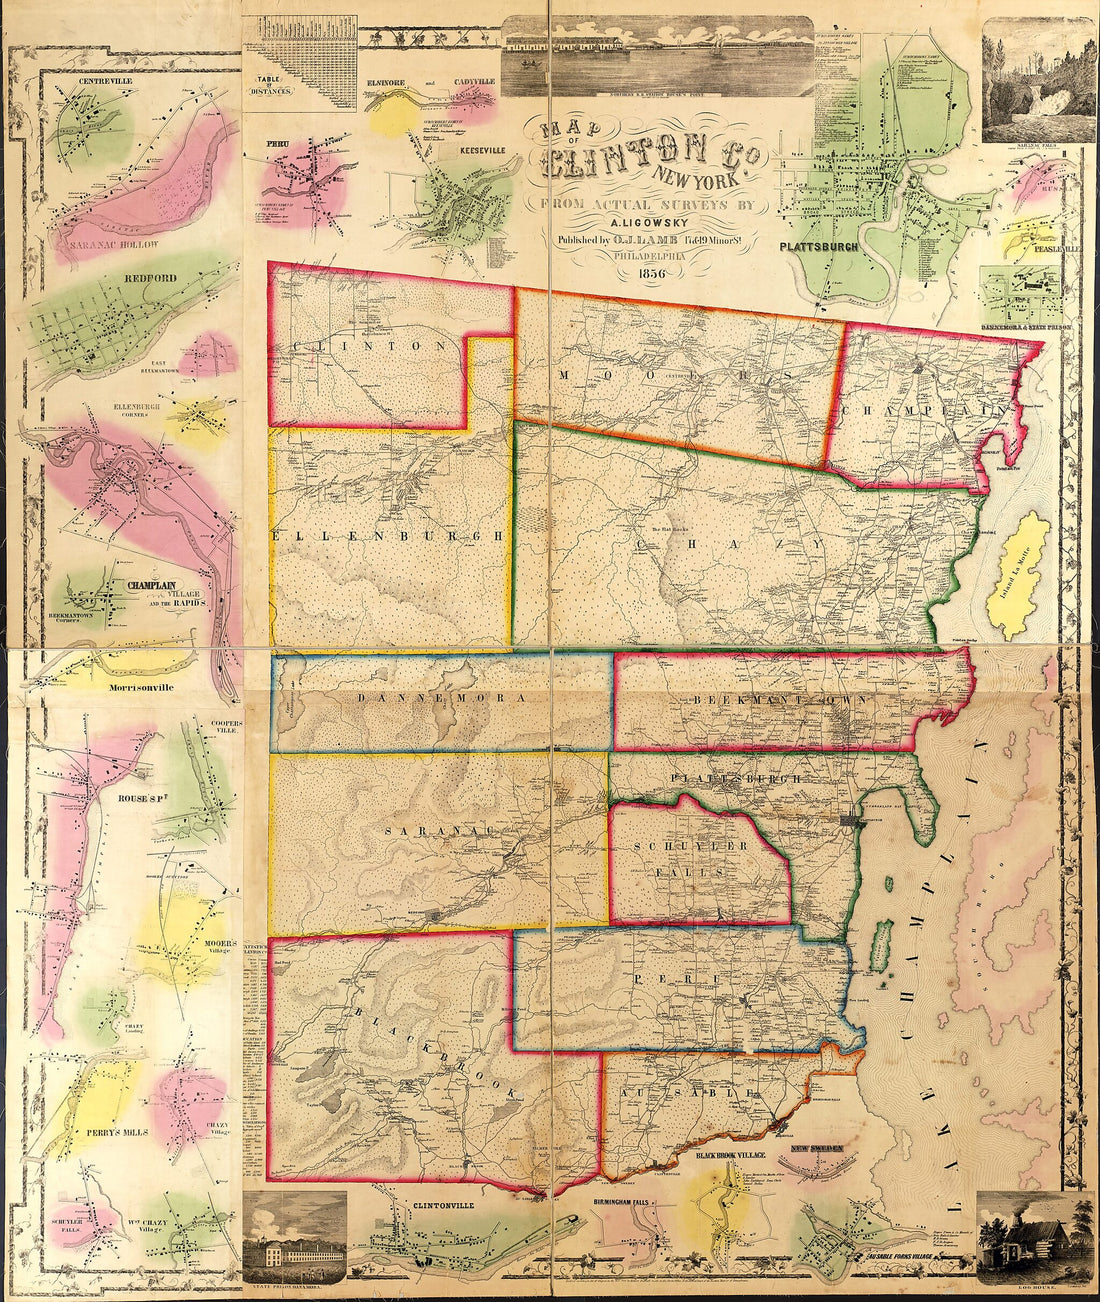 This old map of Map of Clinton County, New York from 1856 was created by A. Ligowsky in 1856